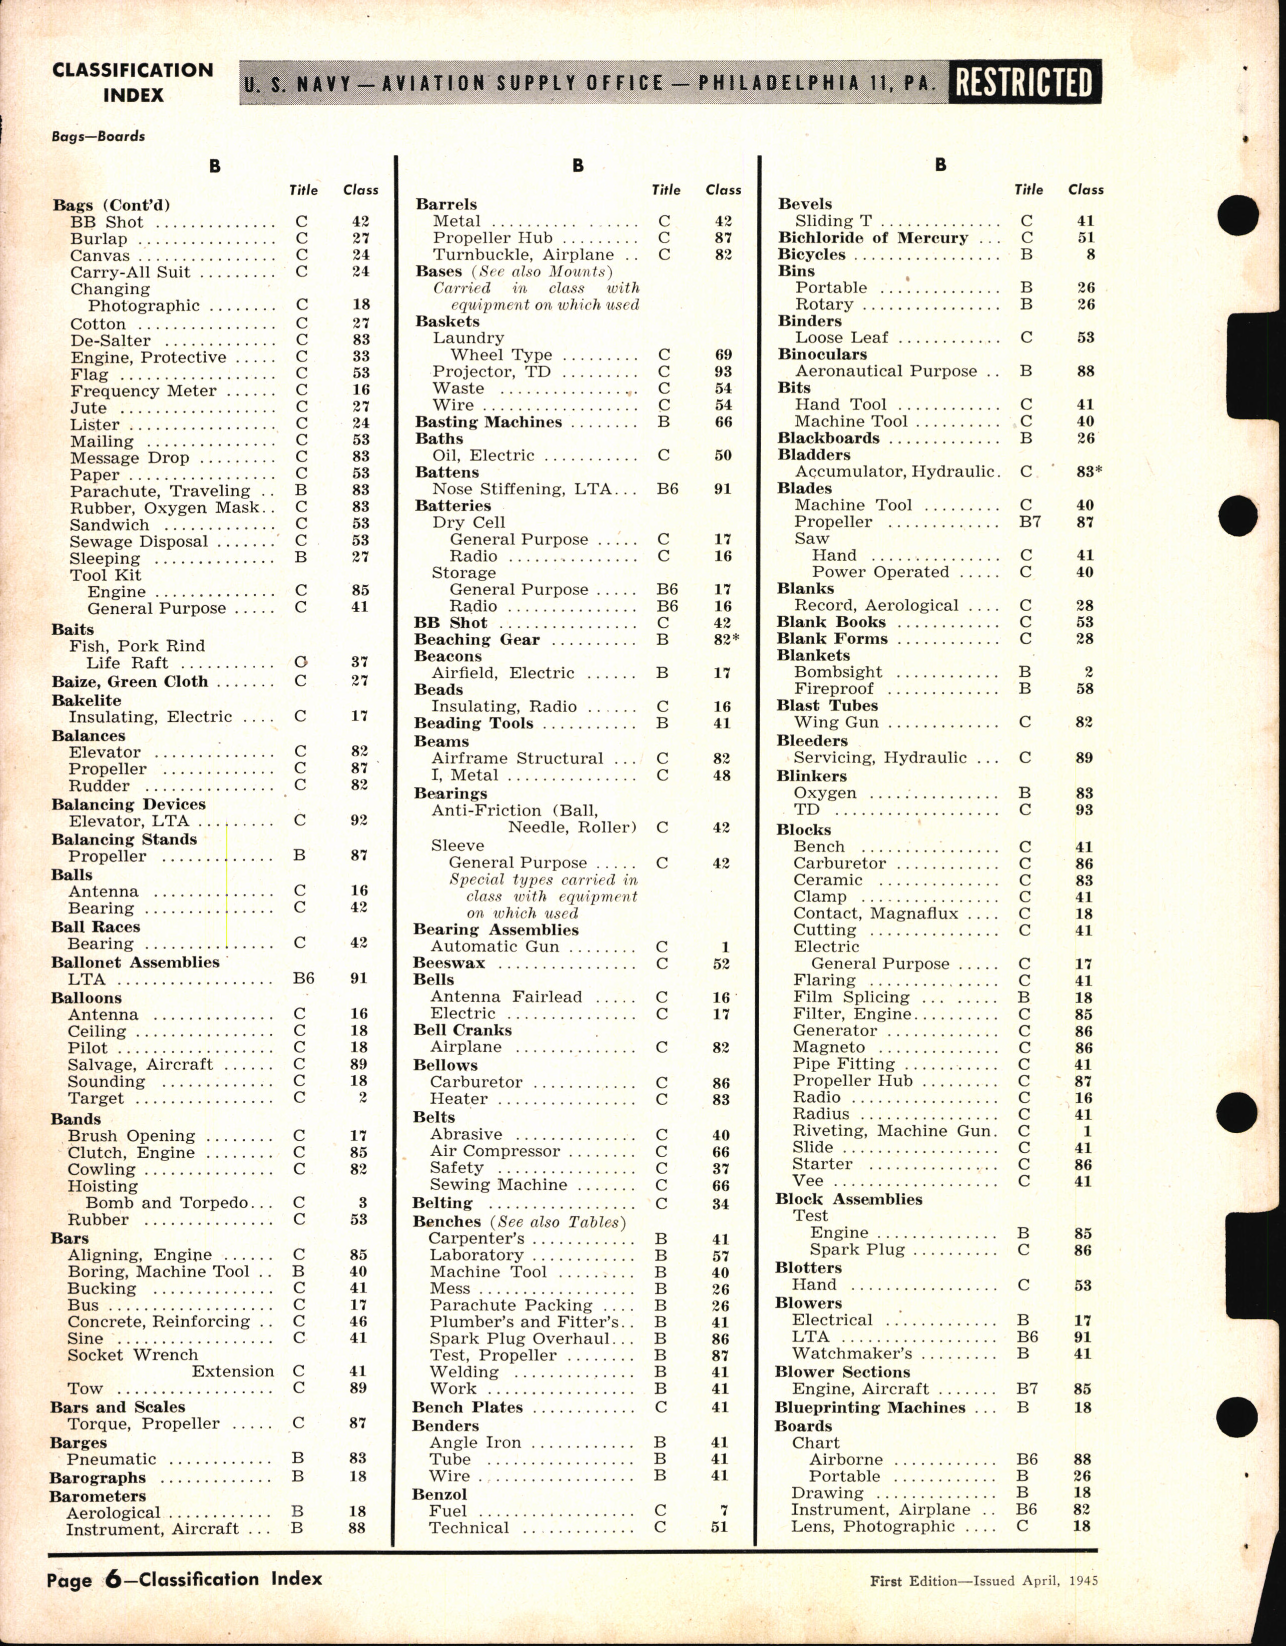 Sample page 6 from AirCorps Library document: Classification Index of Naval Aeronautical Materials